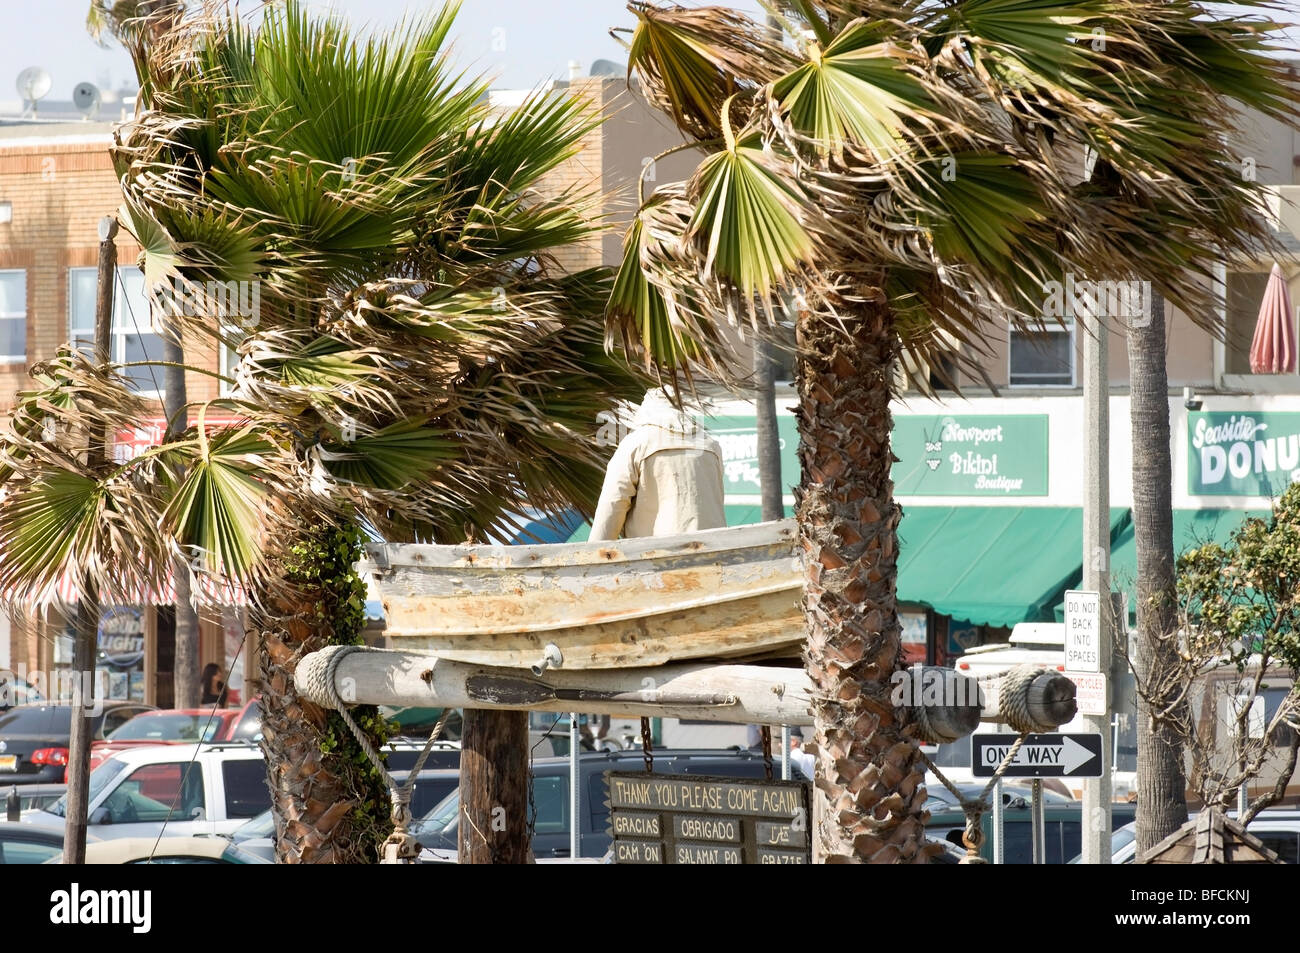 Newport Beach Dory Fishing Fleet Fisherman in a boat up in the Palm Trees Stock Photo